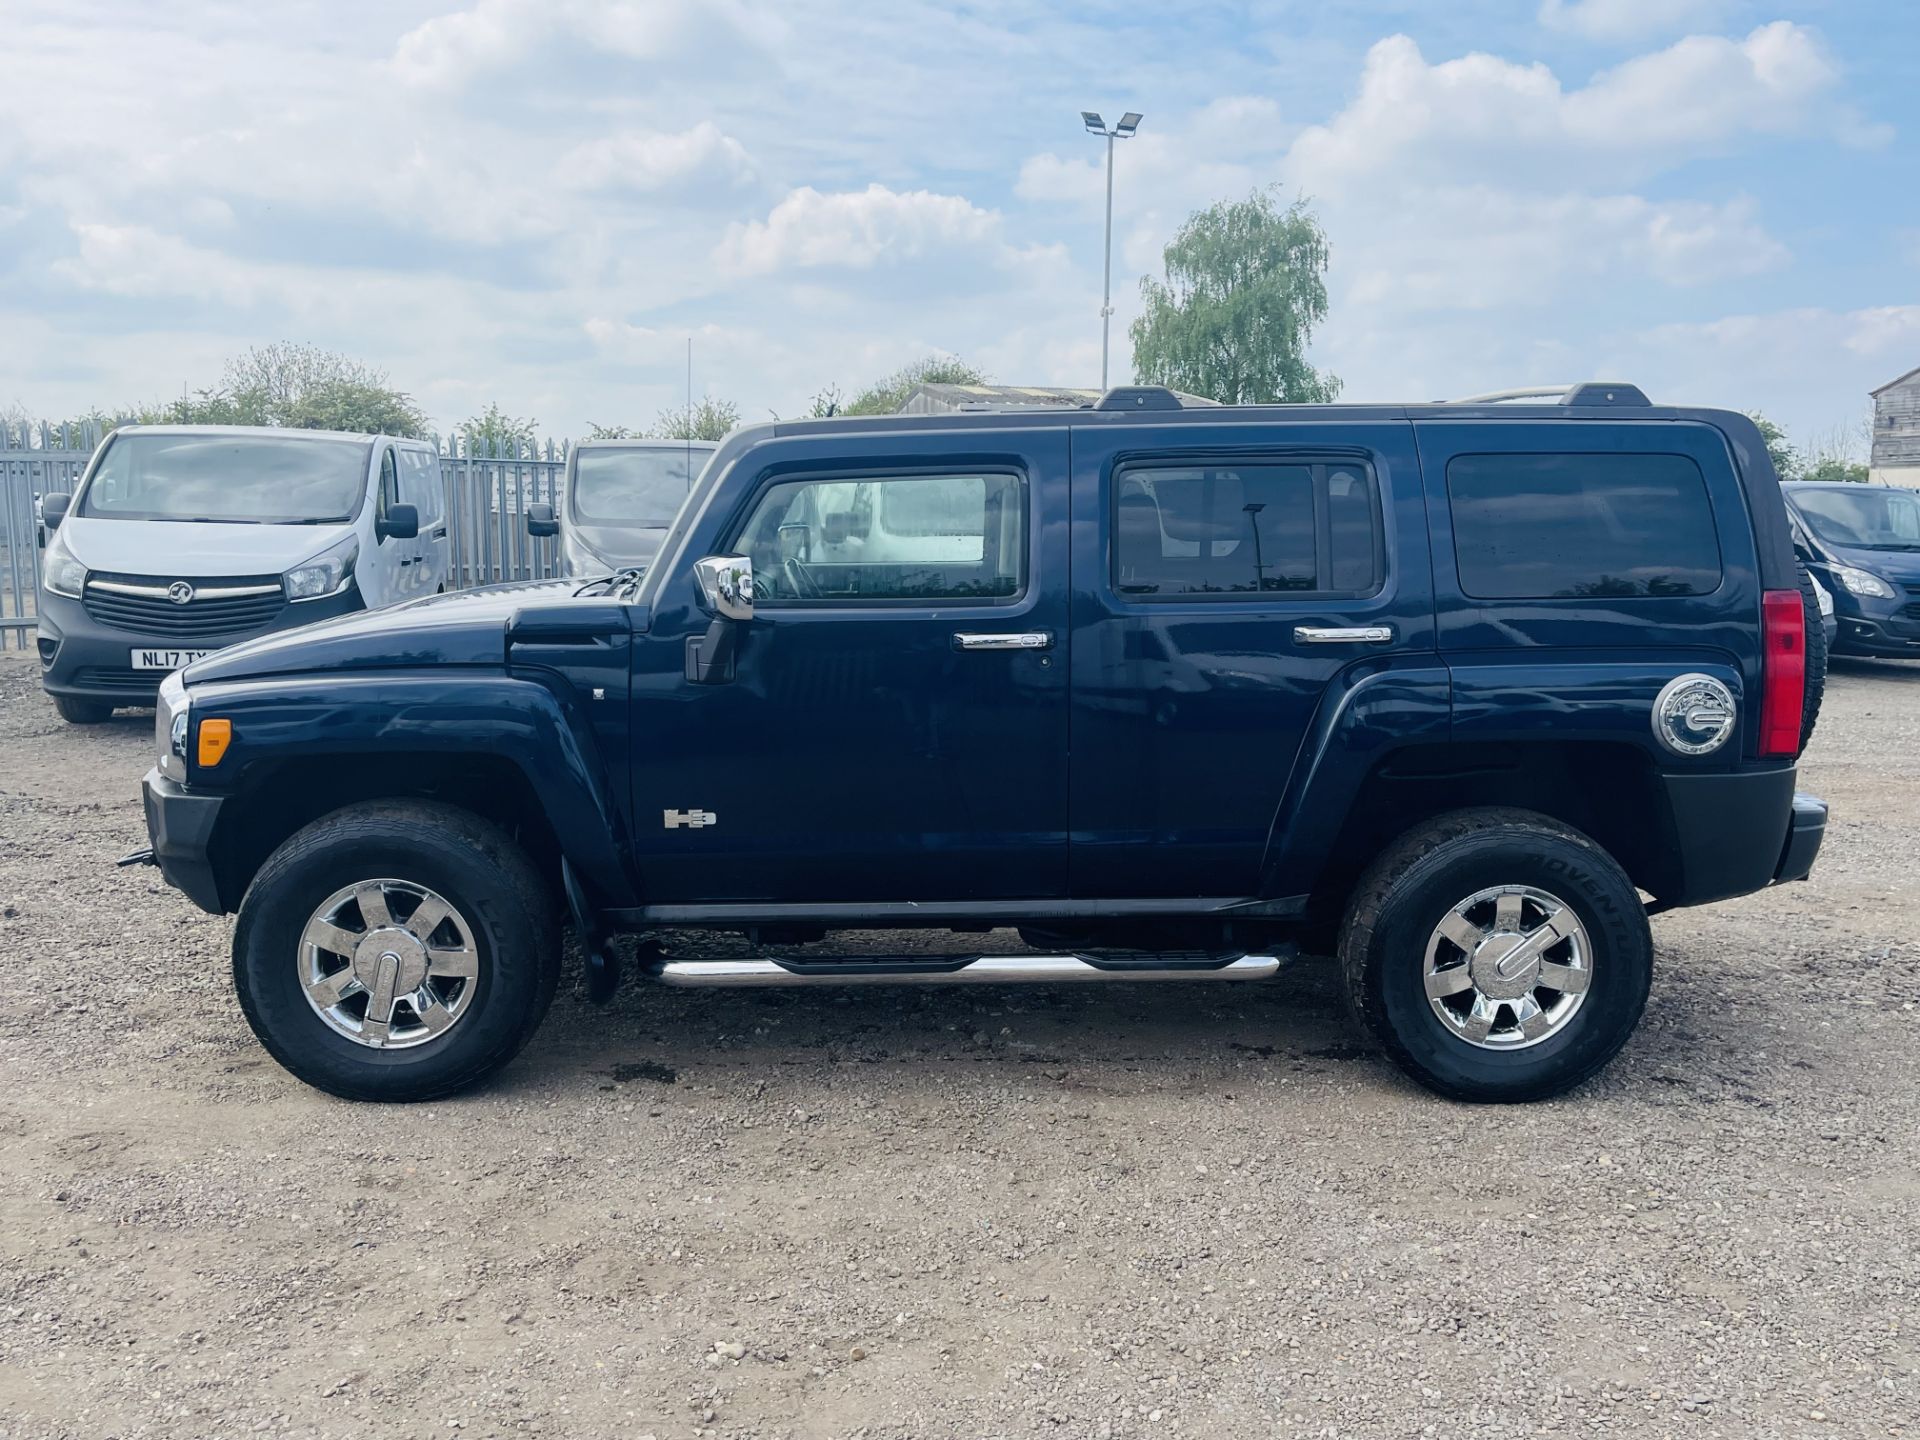 ** ON SALE ** HUMMER H3 3.7L I5 DOHC ' 2007 Year' 4WD ** RARE ** ULEZ Compliant - A/C - LHD - Image 6 of 28